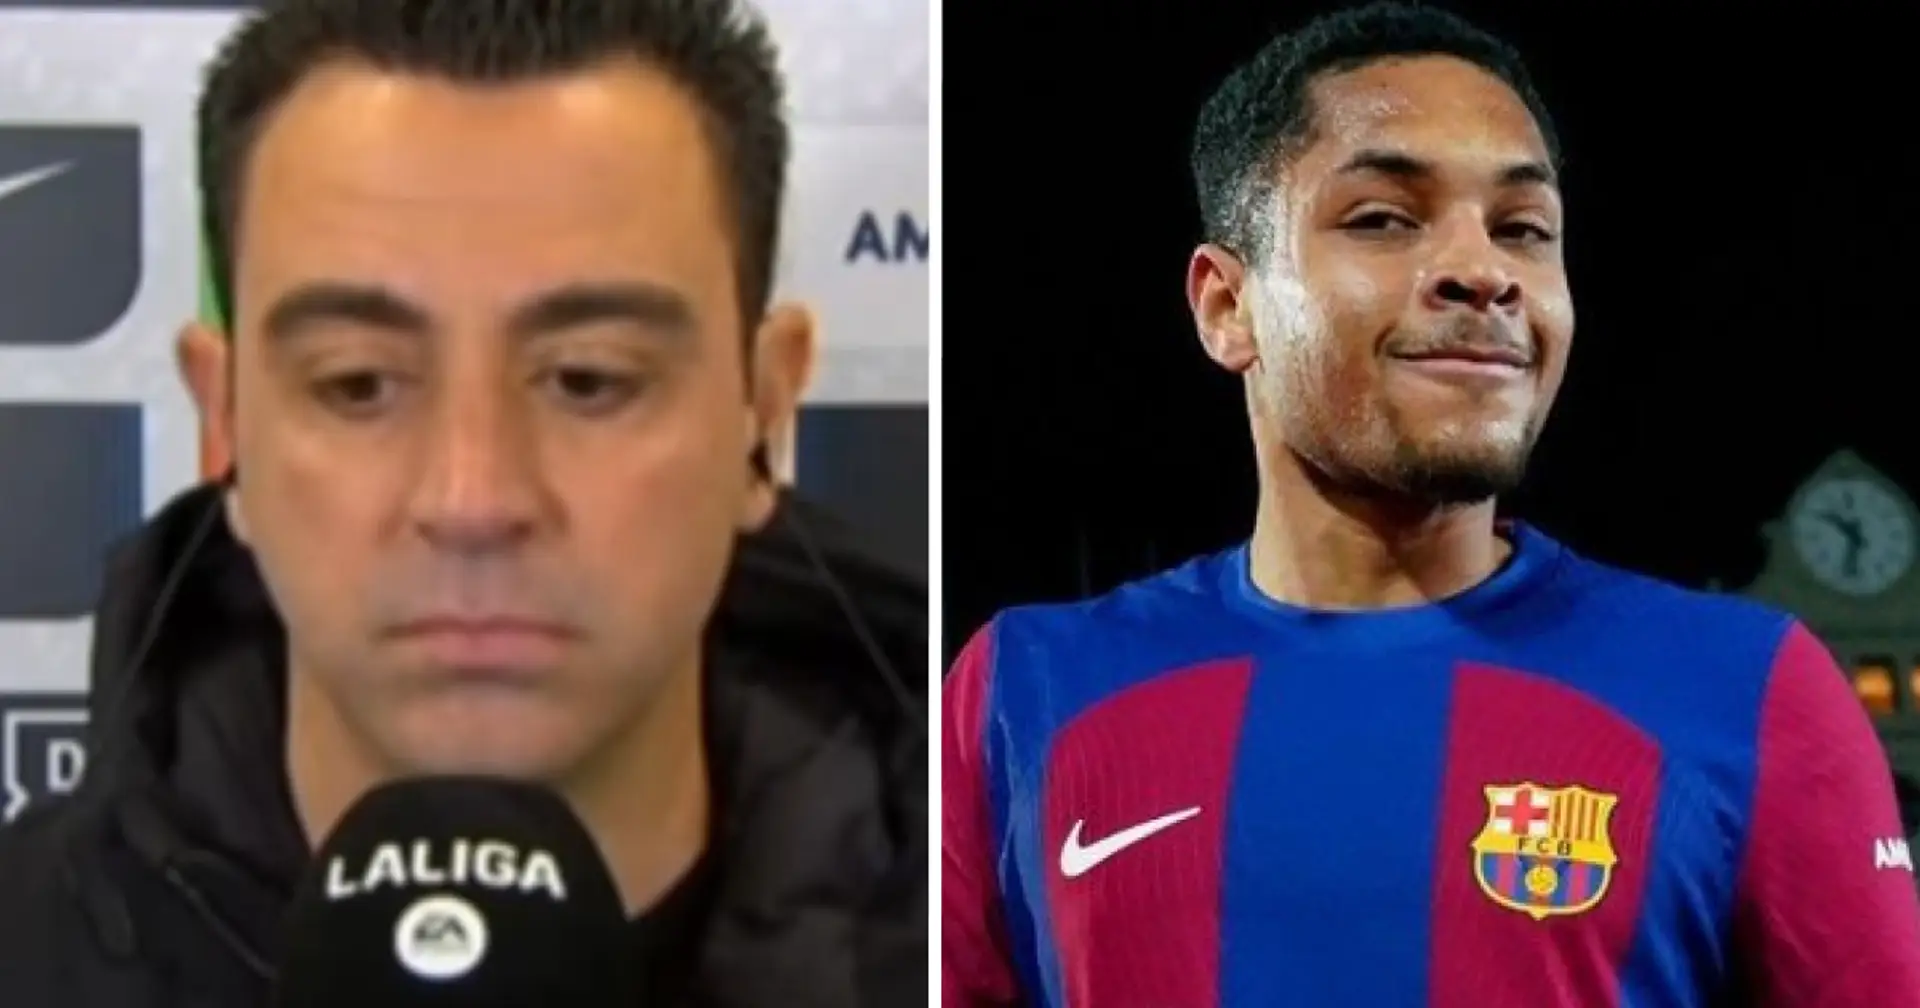 Xavi makes BIG promise to Vitor Roque after Mallorca game